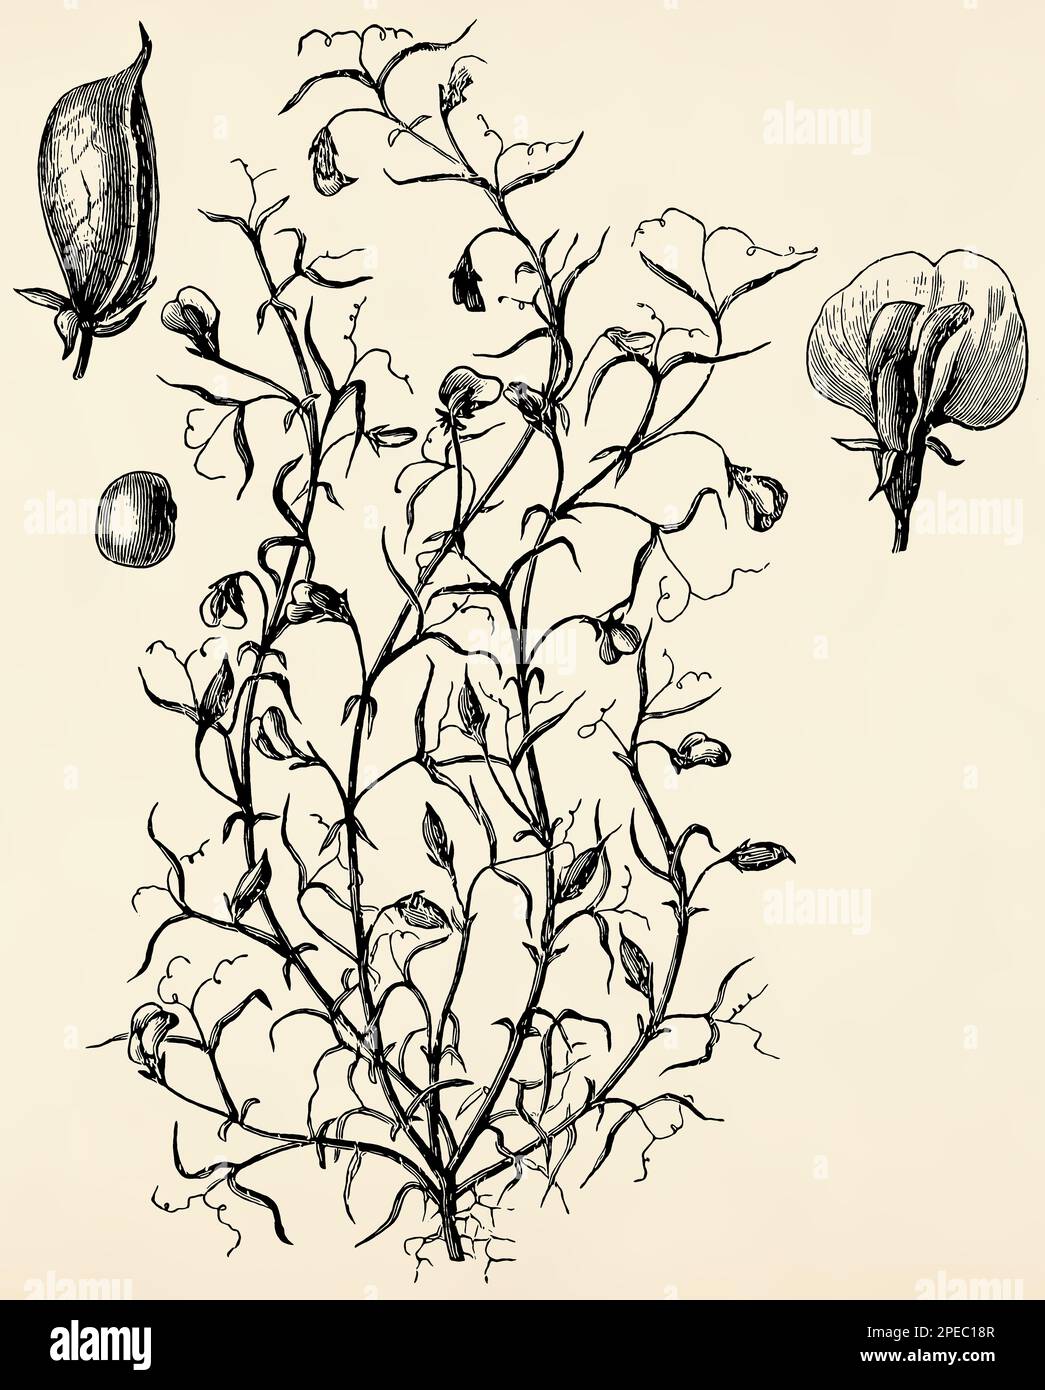 Root system, stem, flowers and fruits of Lathyrus sativus. Antique stylized illustration. Stock Photo